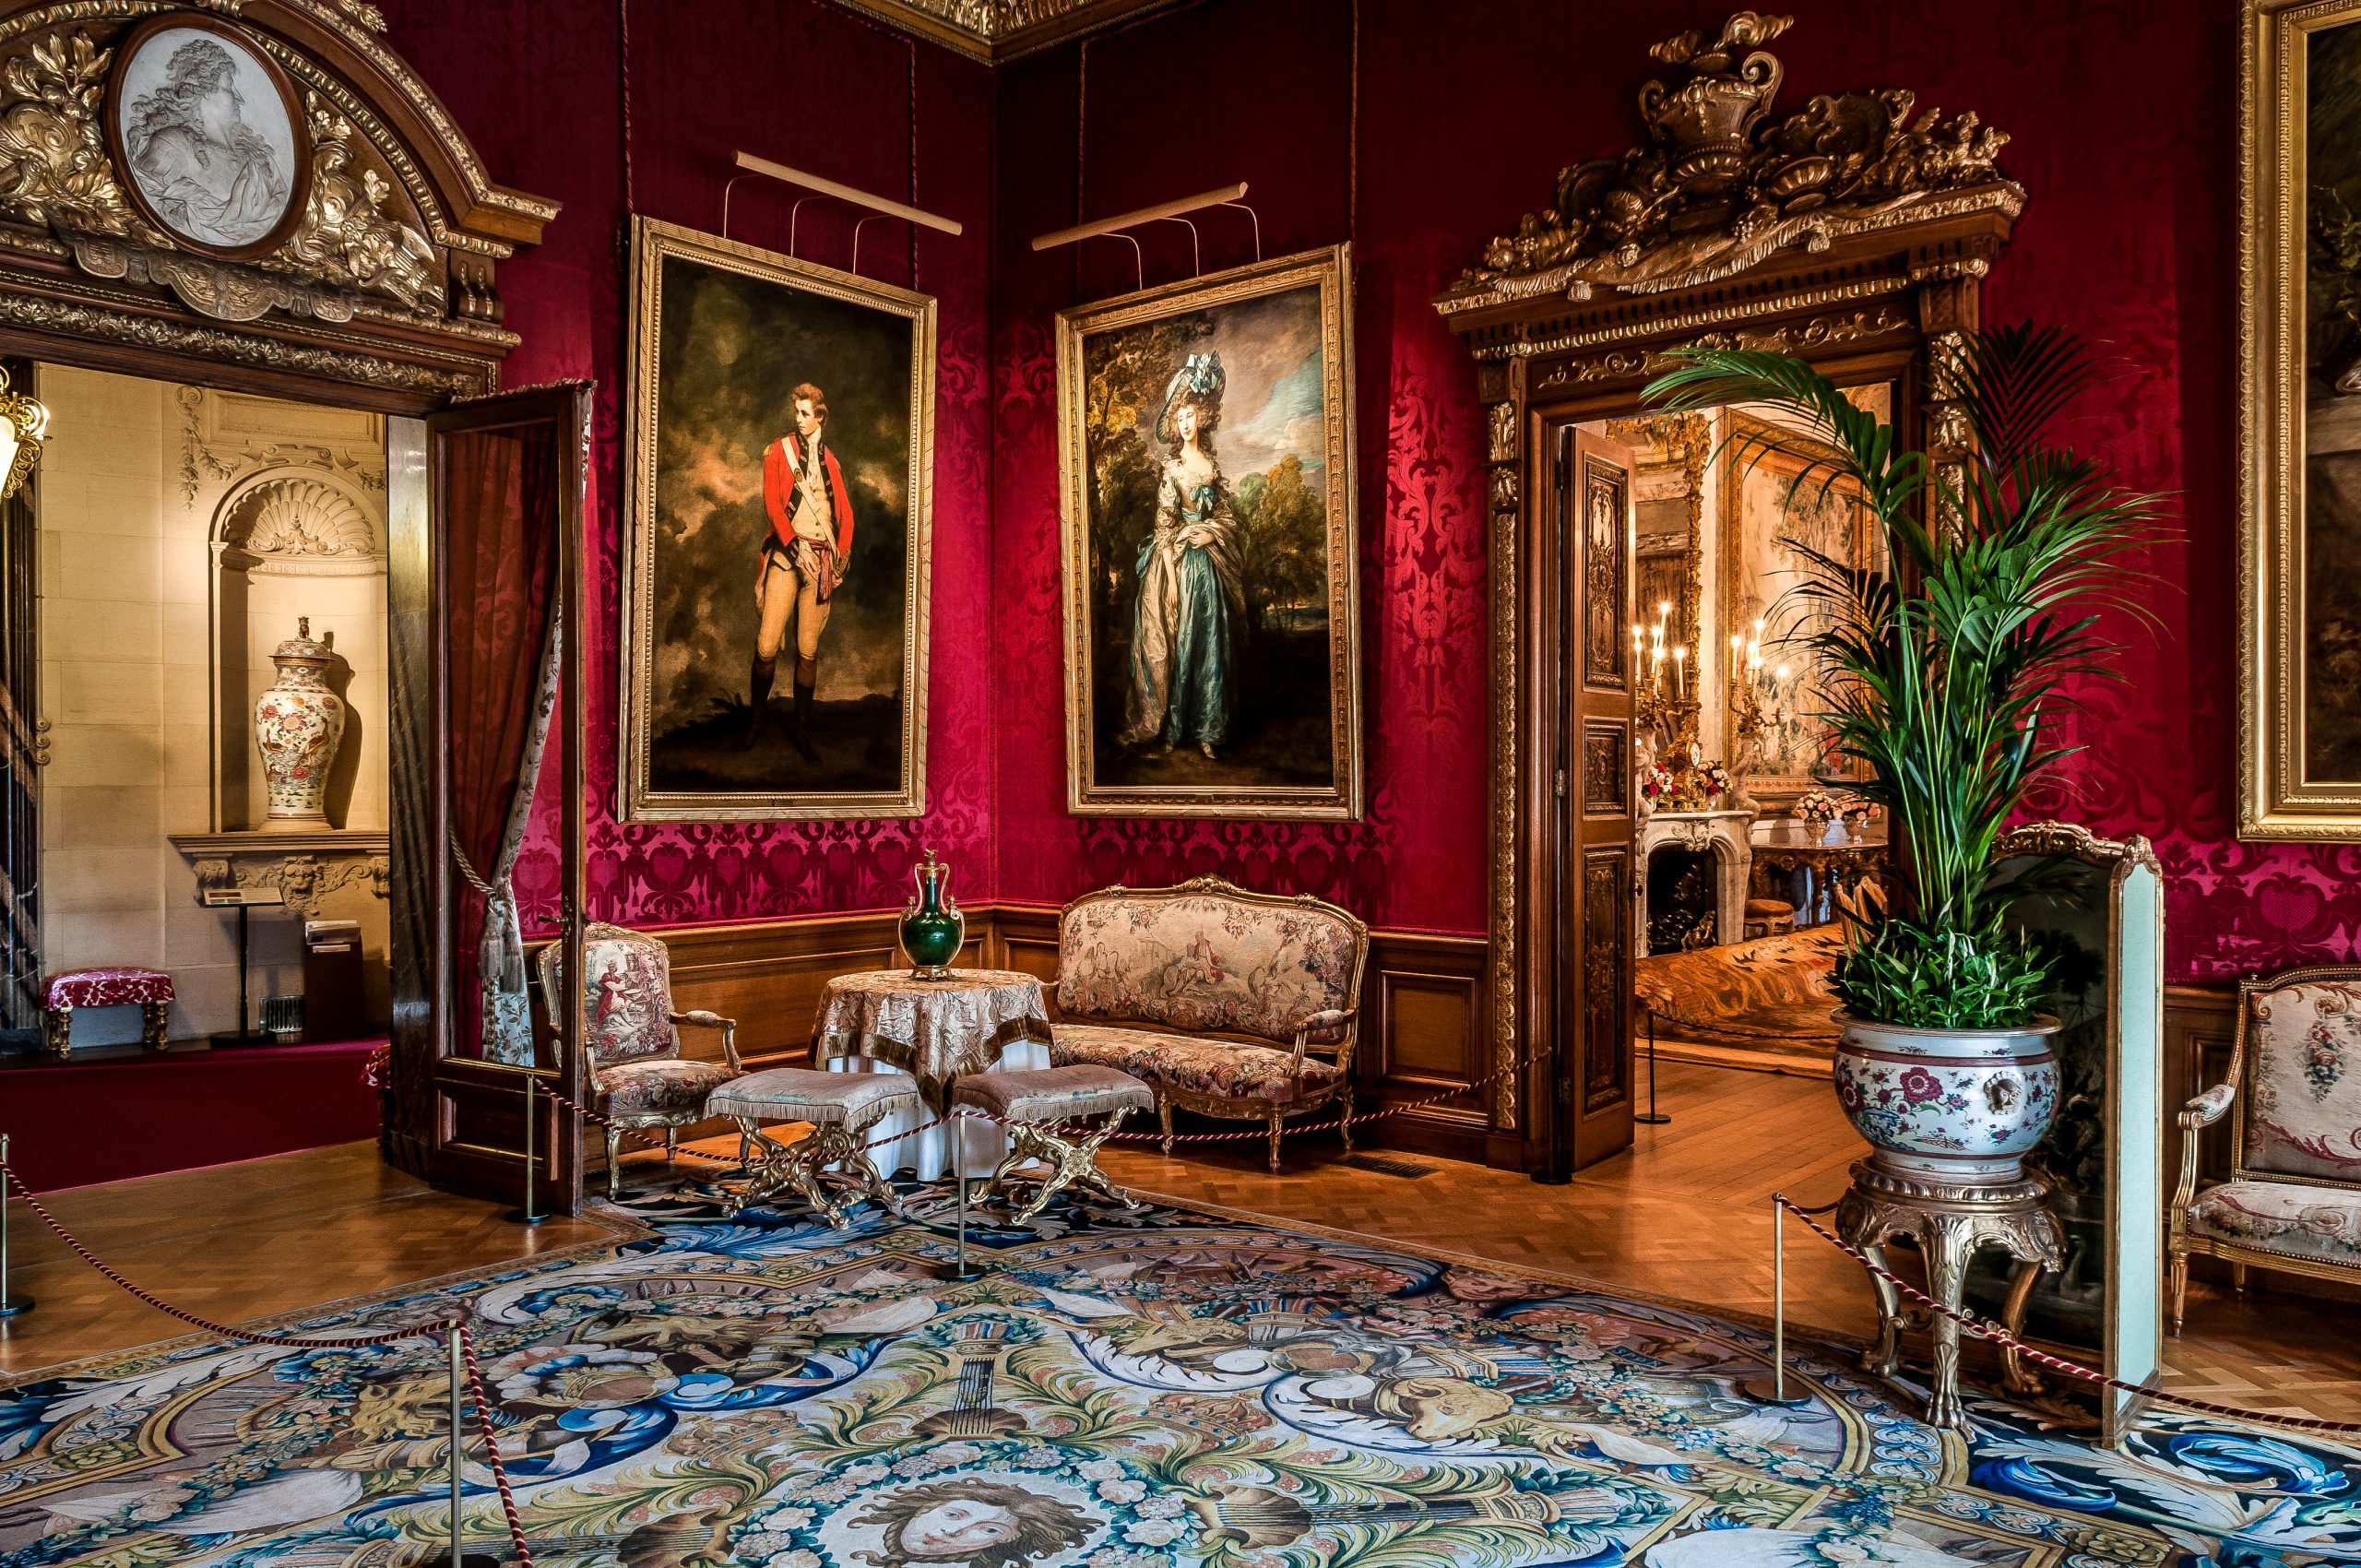 The Red Drawing Room, Waddesdon Manor. Photo Mike Fear © The National Trust, Waddesdon Manor